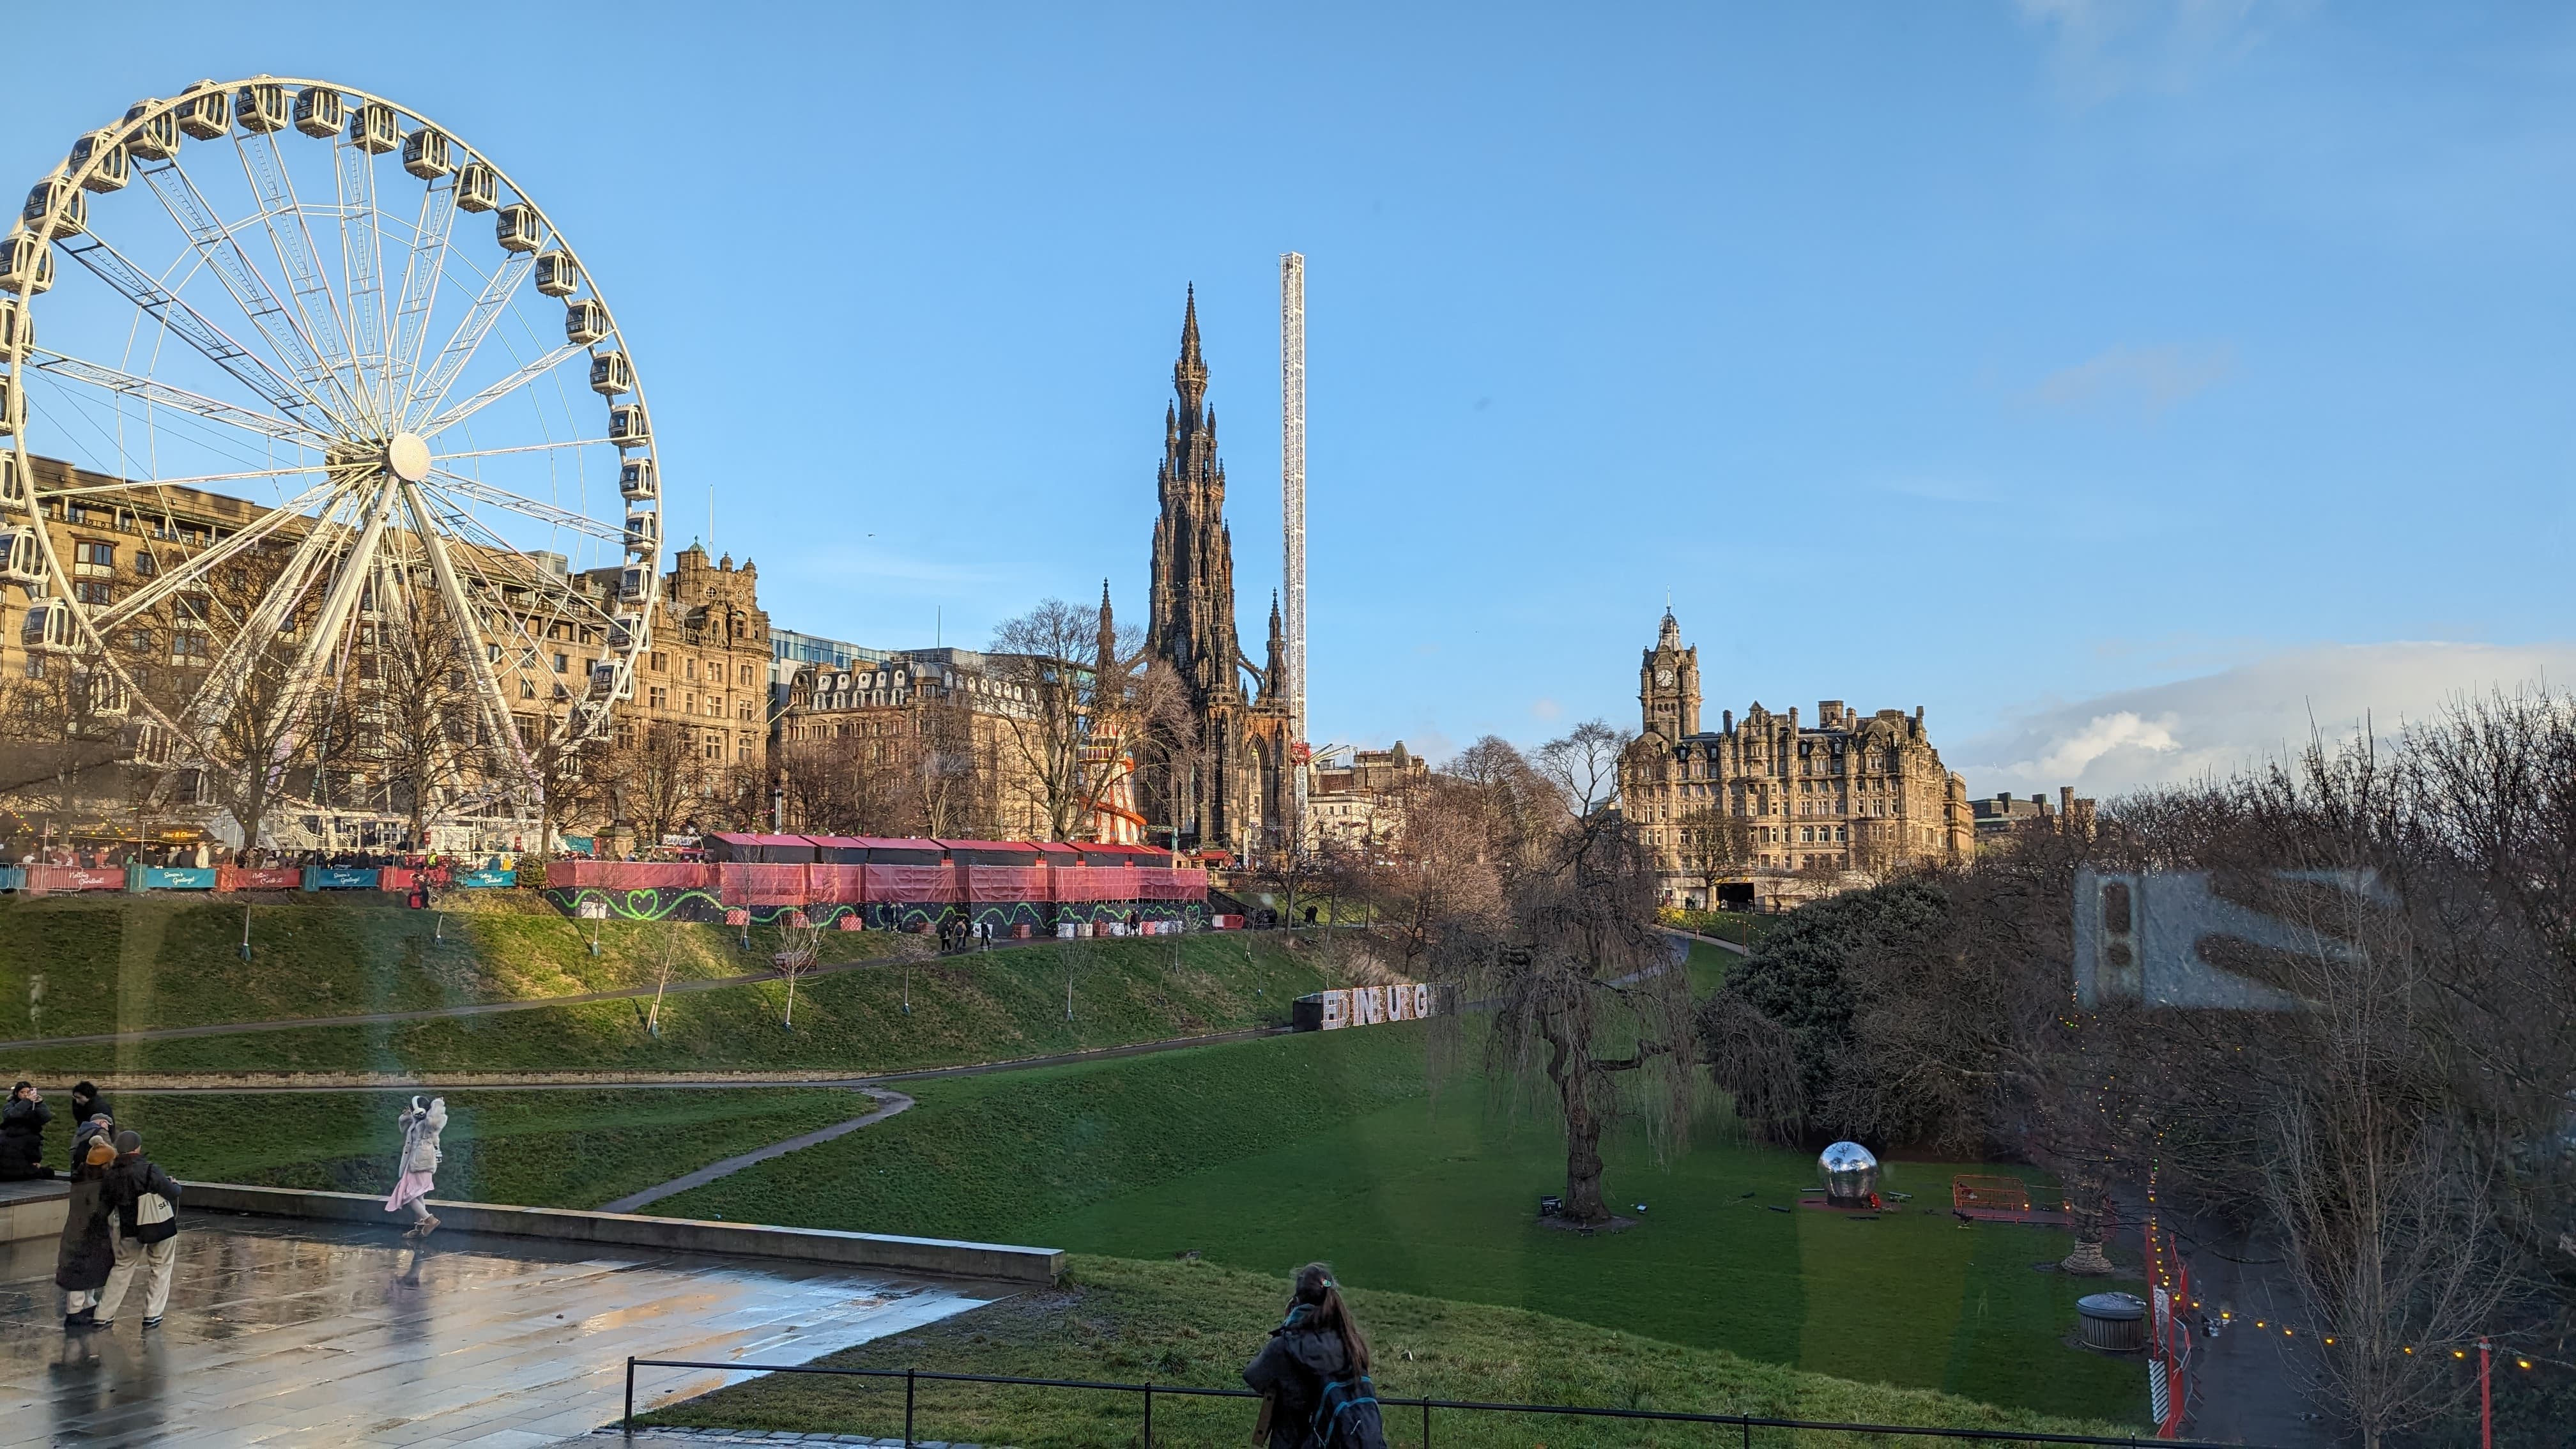 A photo of Edinburgh shows blue skies and historic buildings